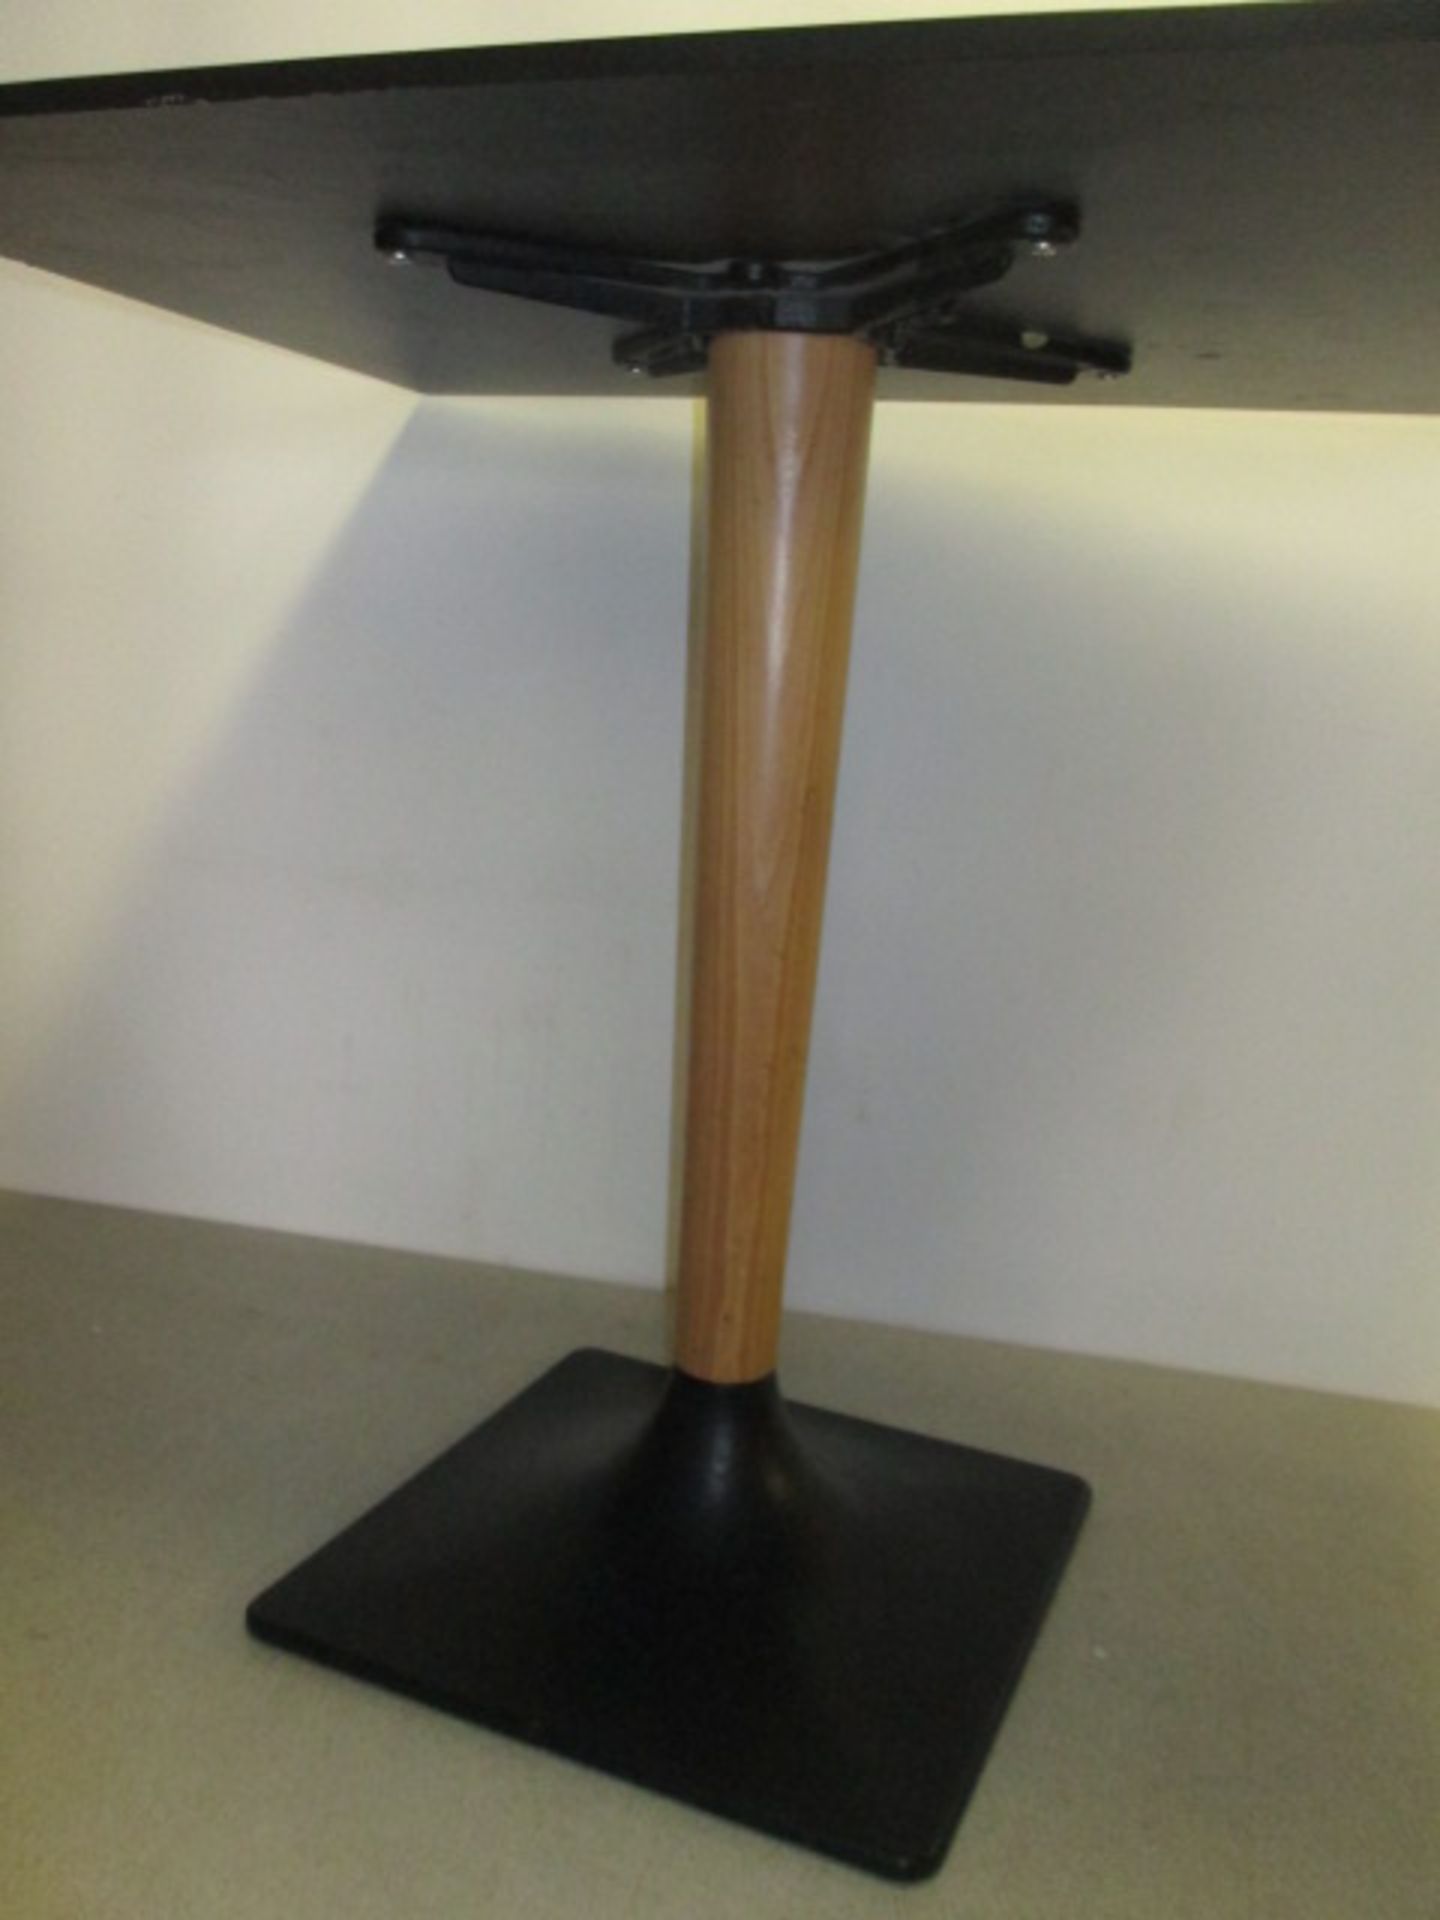 1 x Pedrali Black Laminate Topped Restaurant Table on Wooden Support & Cast Iron Base, Size 50cm x - Image 2 of 2